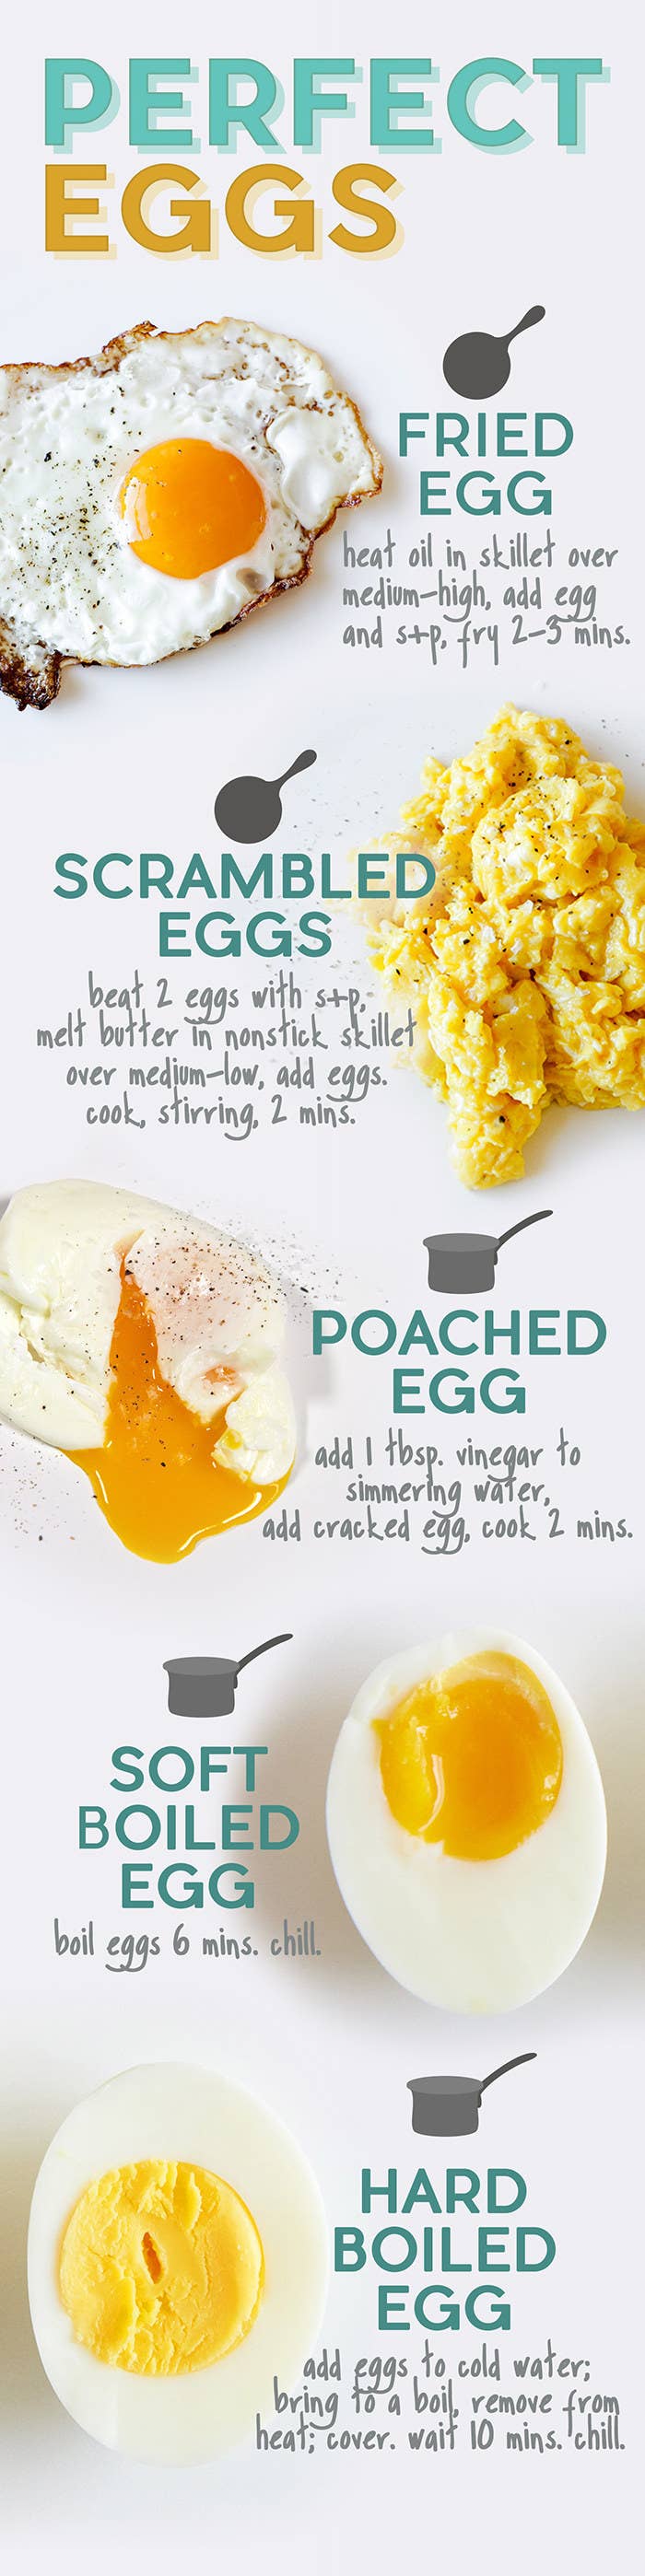 I Was Never Able to Poach Eggs Until I Found Our Place's Egg Poacher